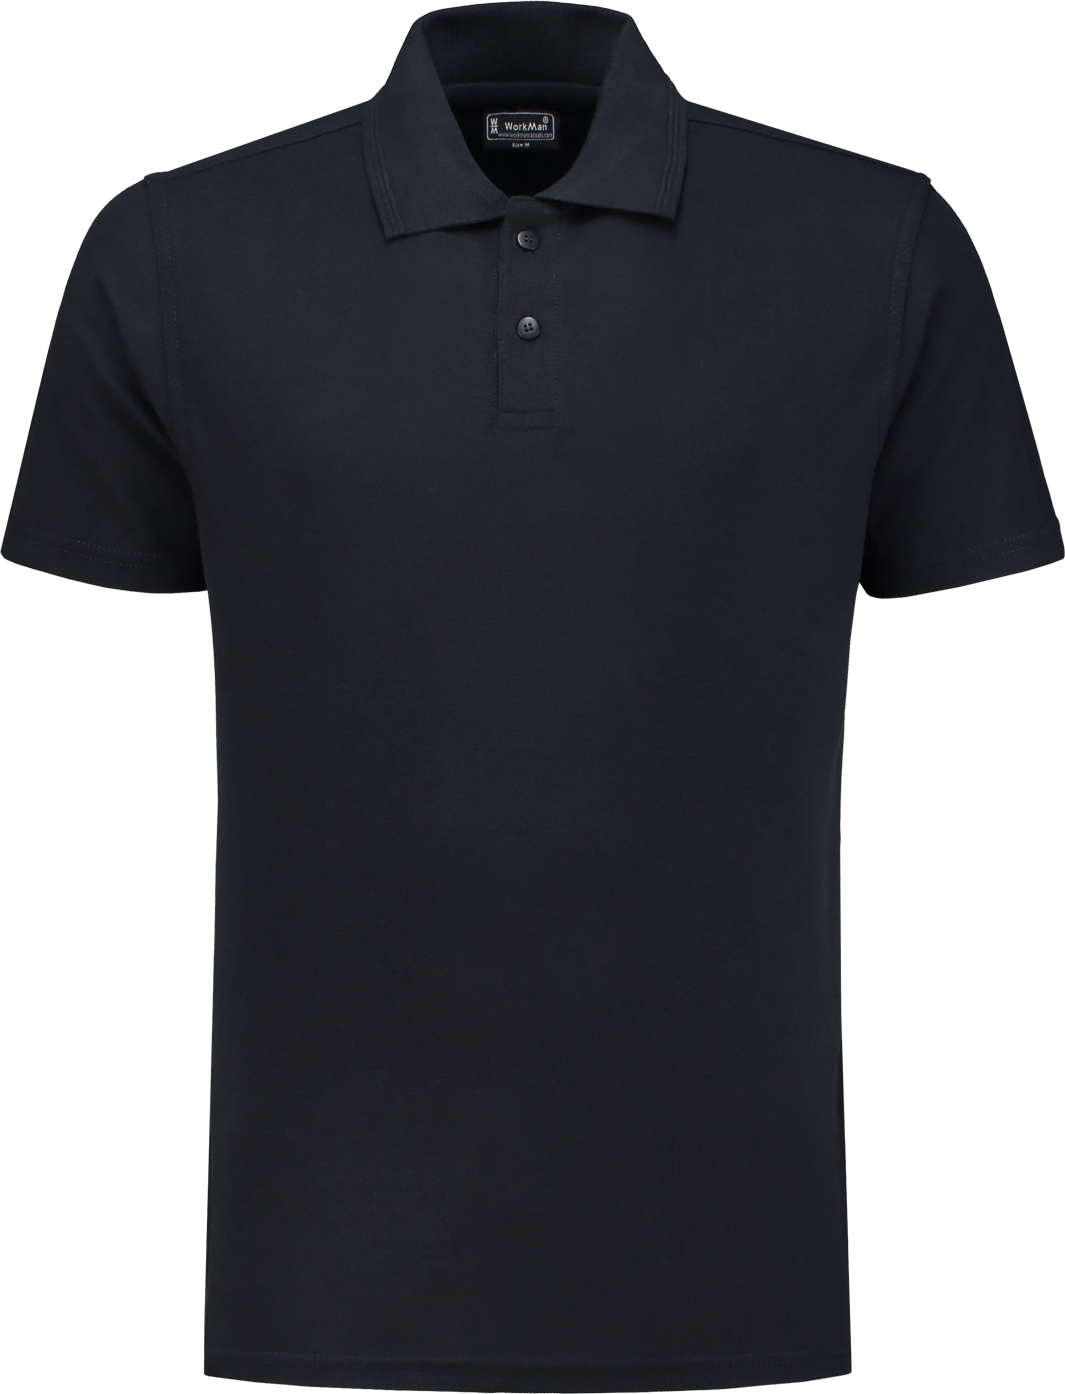 8102 Poloshirt Outfitters Navy